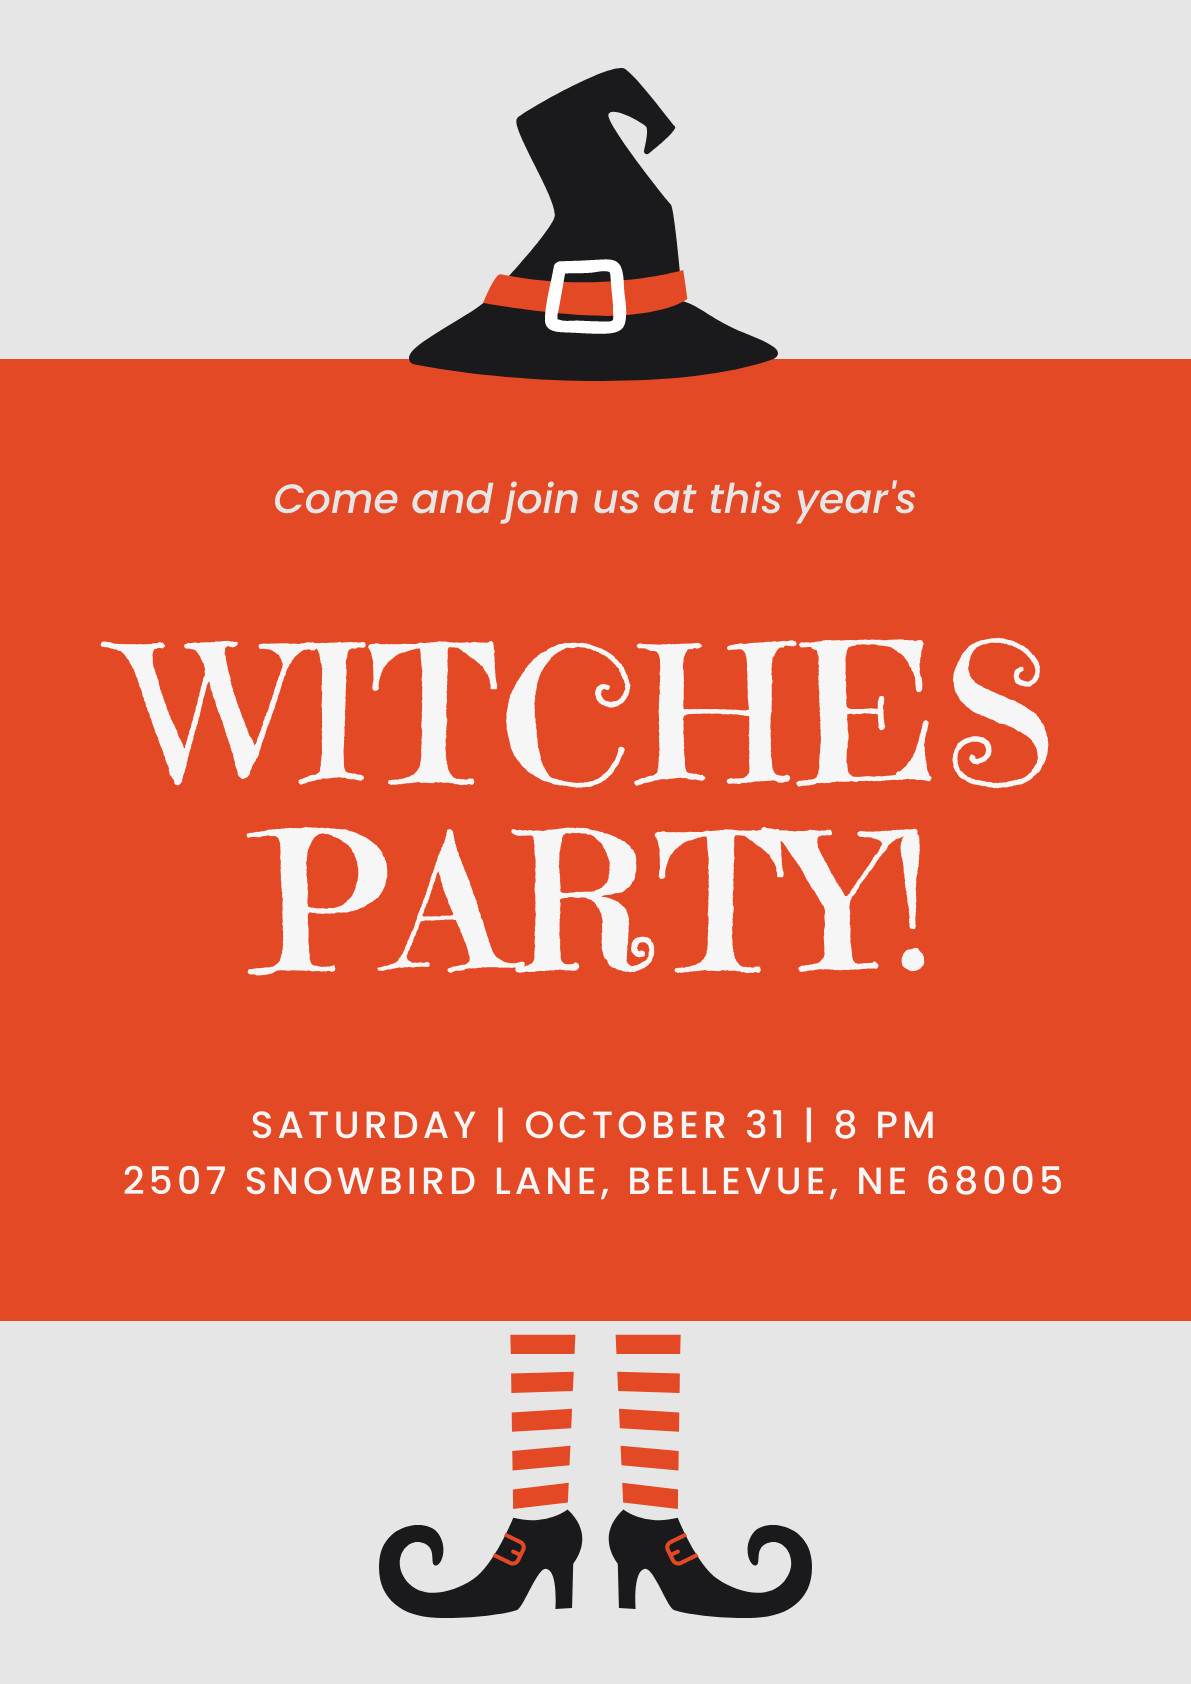 Halloween Witches Red Party Poster 1191x1684